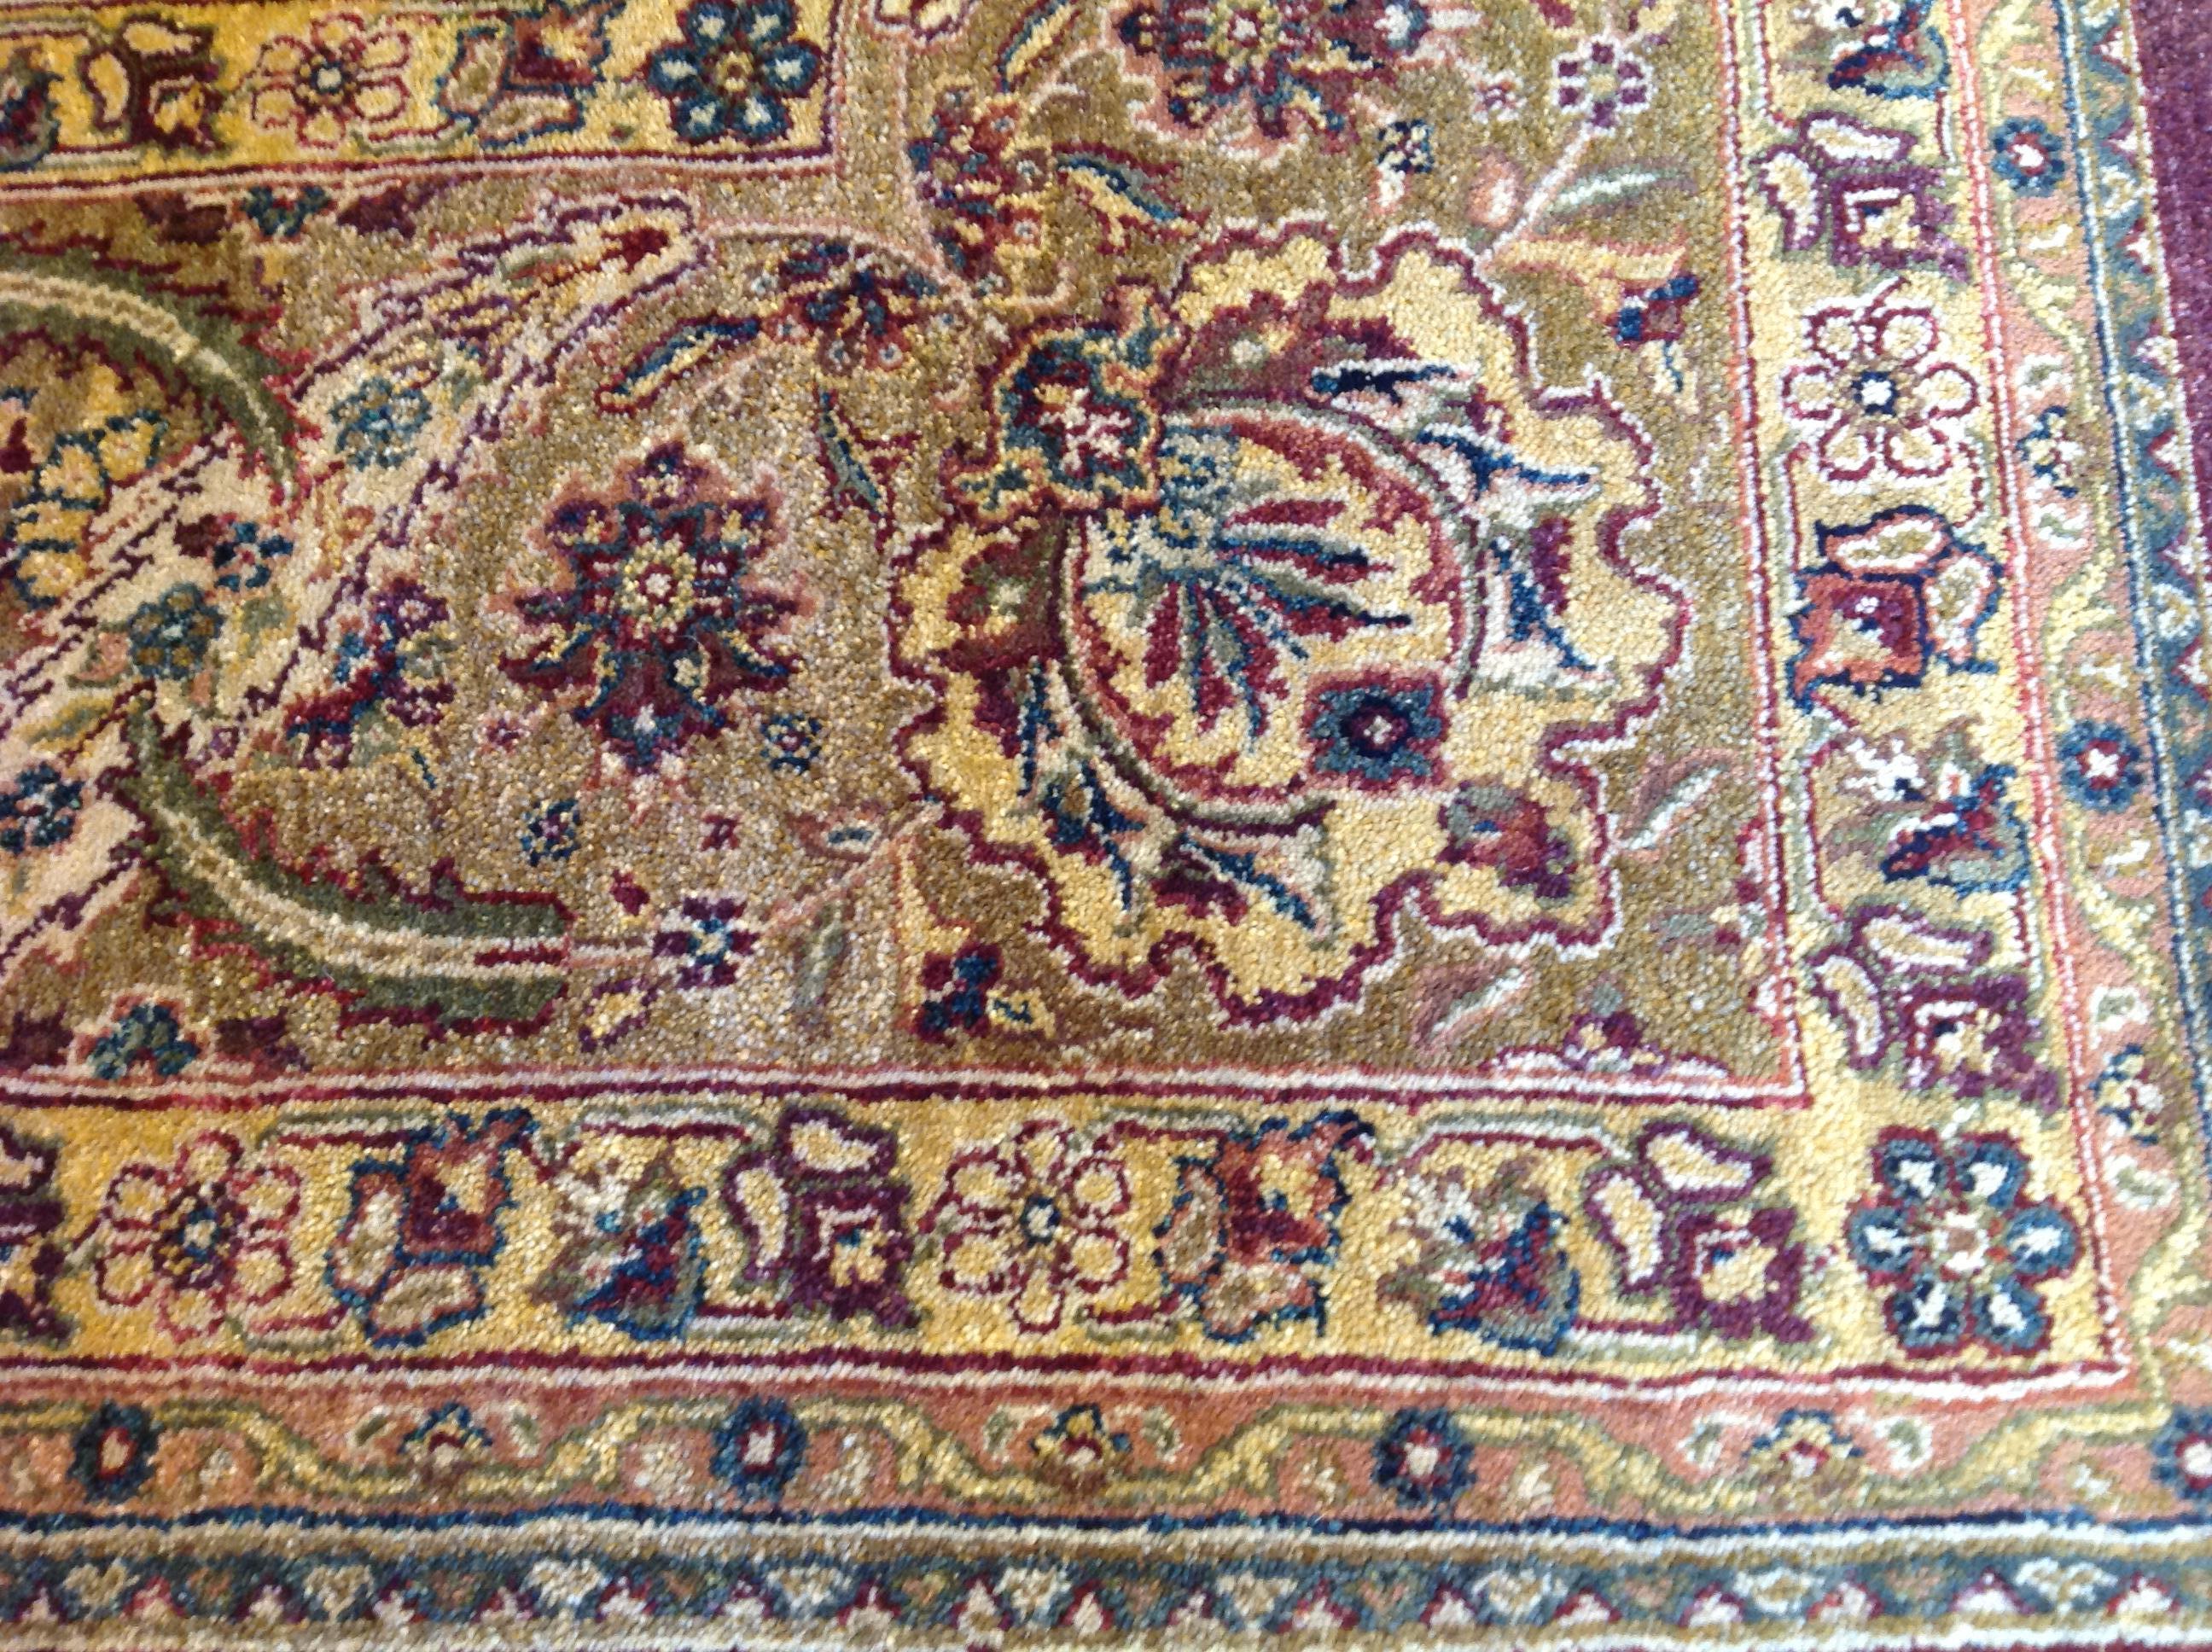 True to the highly decorative nature of the Mahal style, this elegant area rug features a sophisticated floral design against a burgundy center panel and light green and beige border. A sophisticated piece for home or office. Hand knotted in India.